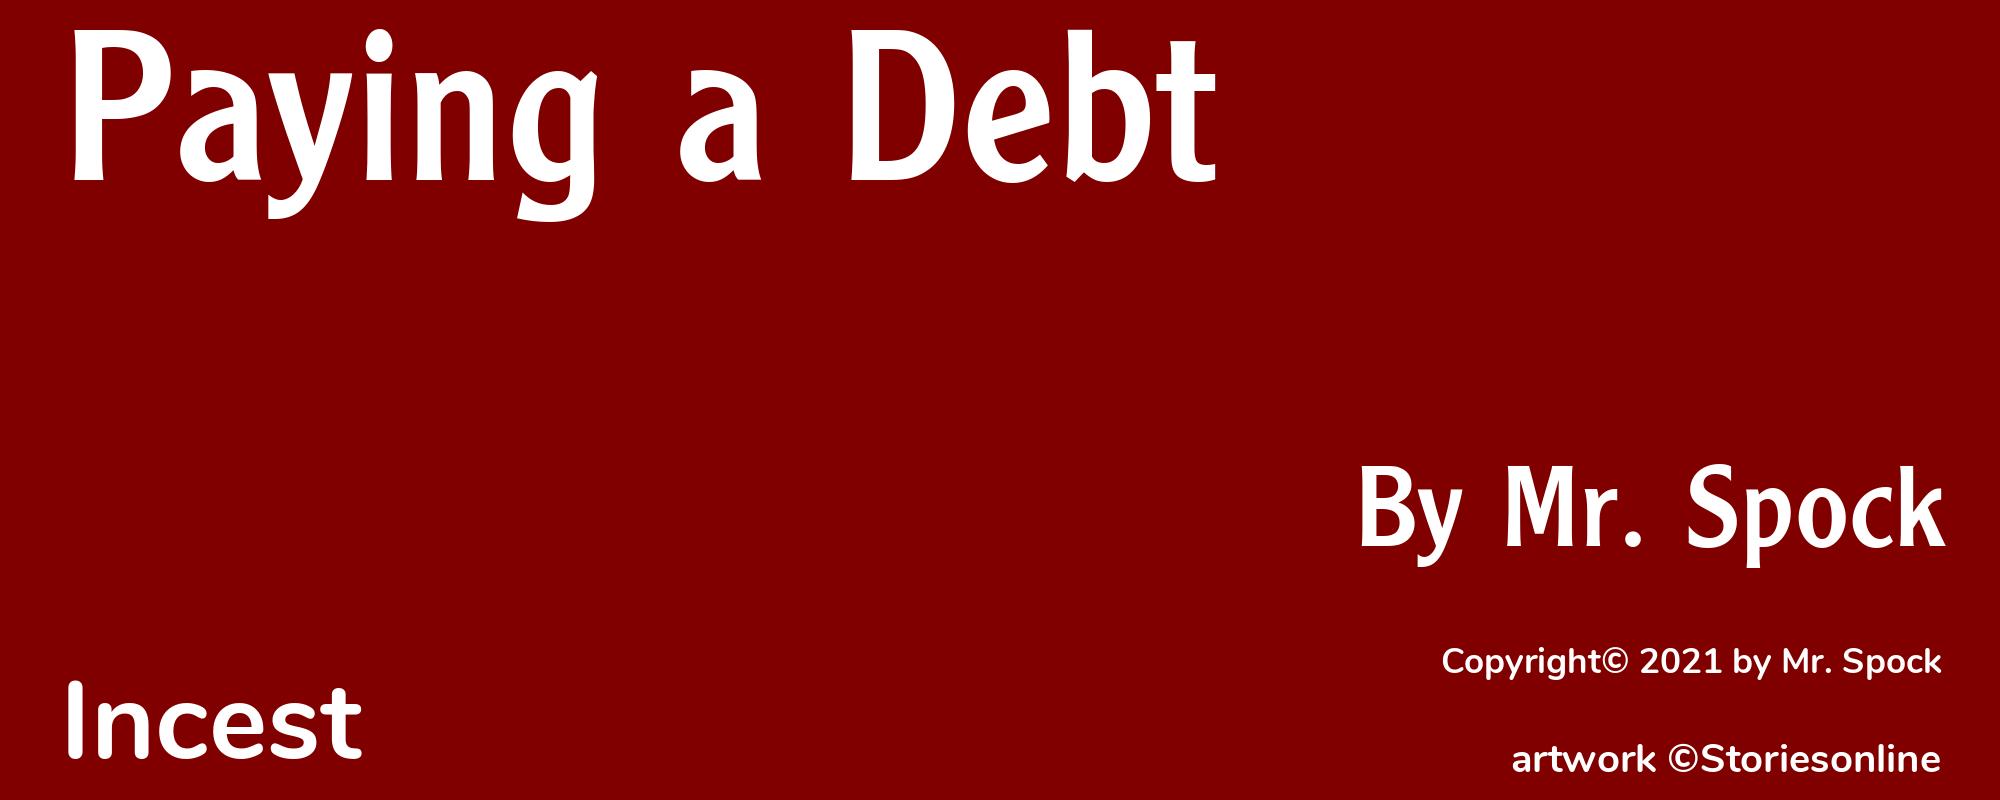 Paying a Debt - Cover